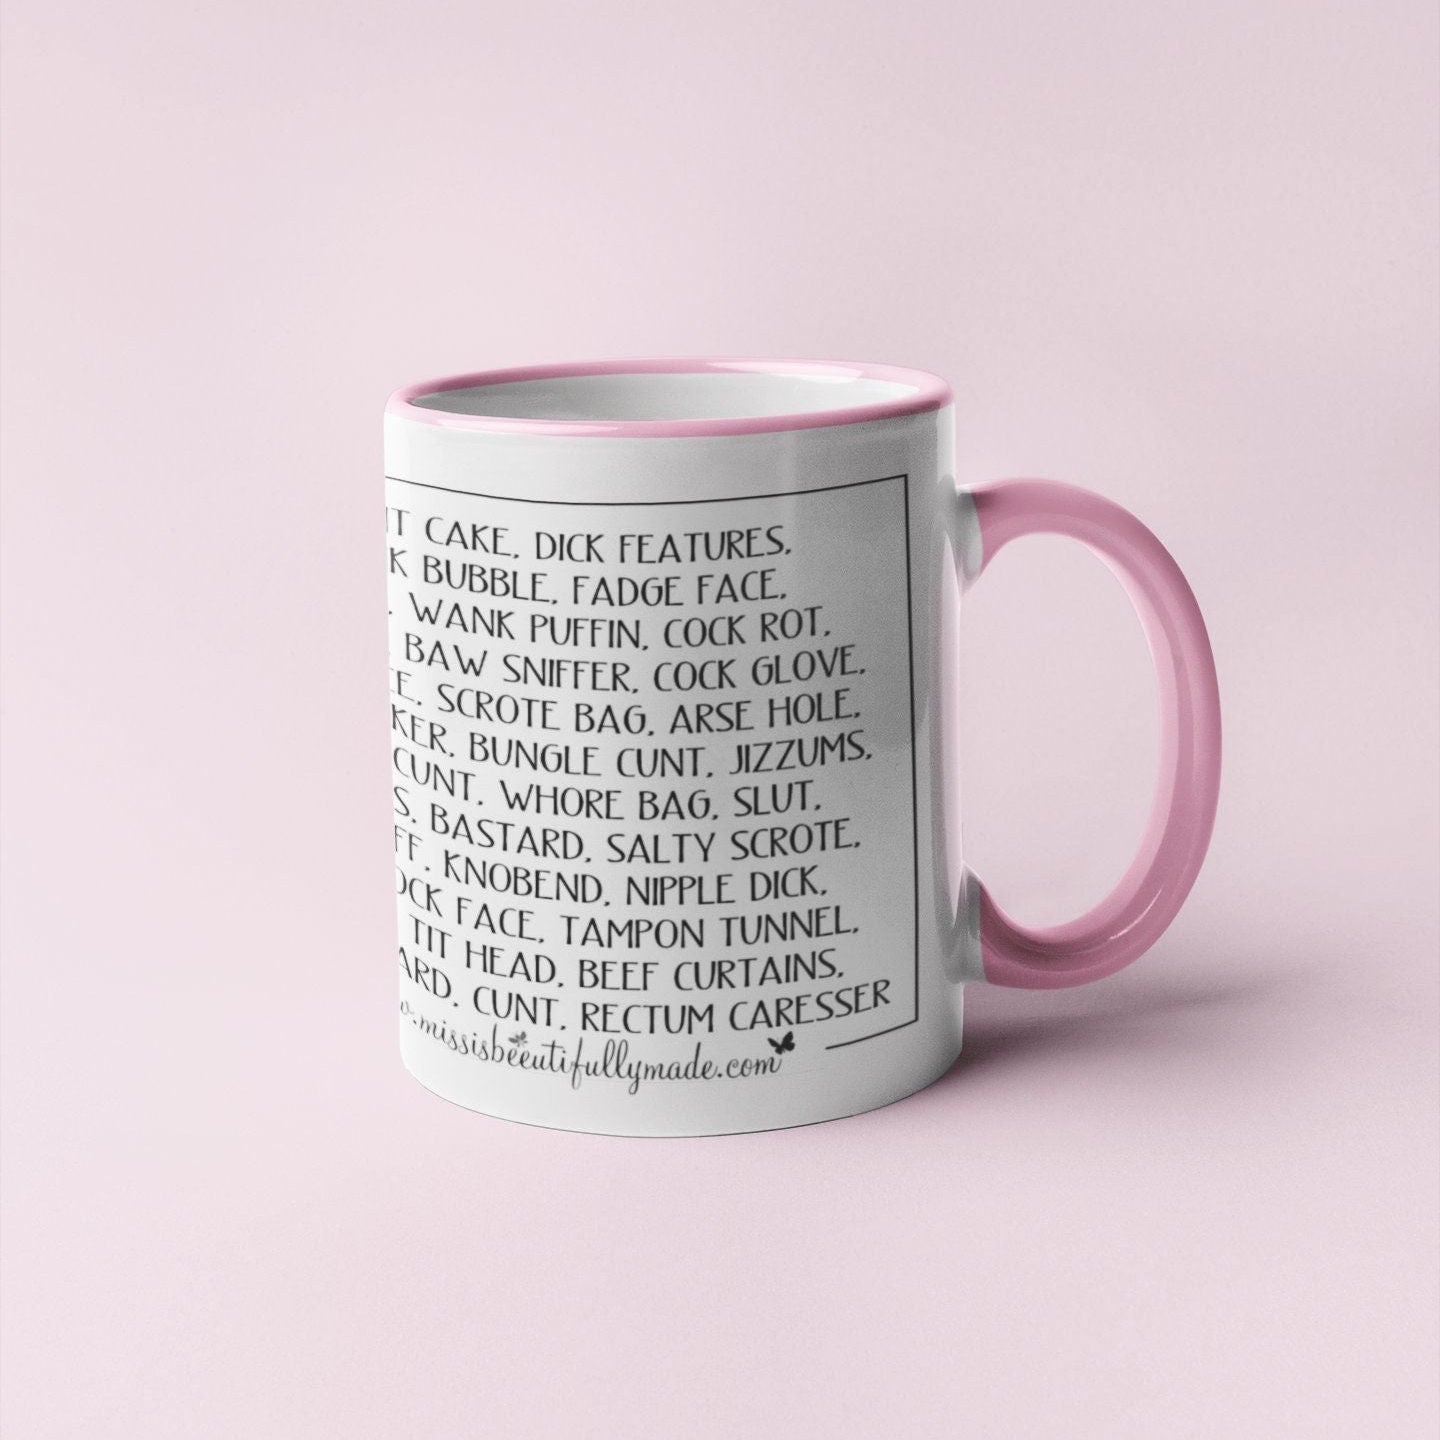 A white ceramic mug with a pink handle and inner featuring a full wrap design with funny words printed throughout. The words include c*nt chops, twat waffle, cock womble, piss flaps, etc. Printed in black ink.